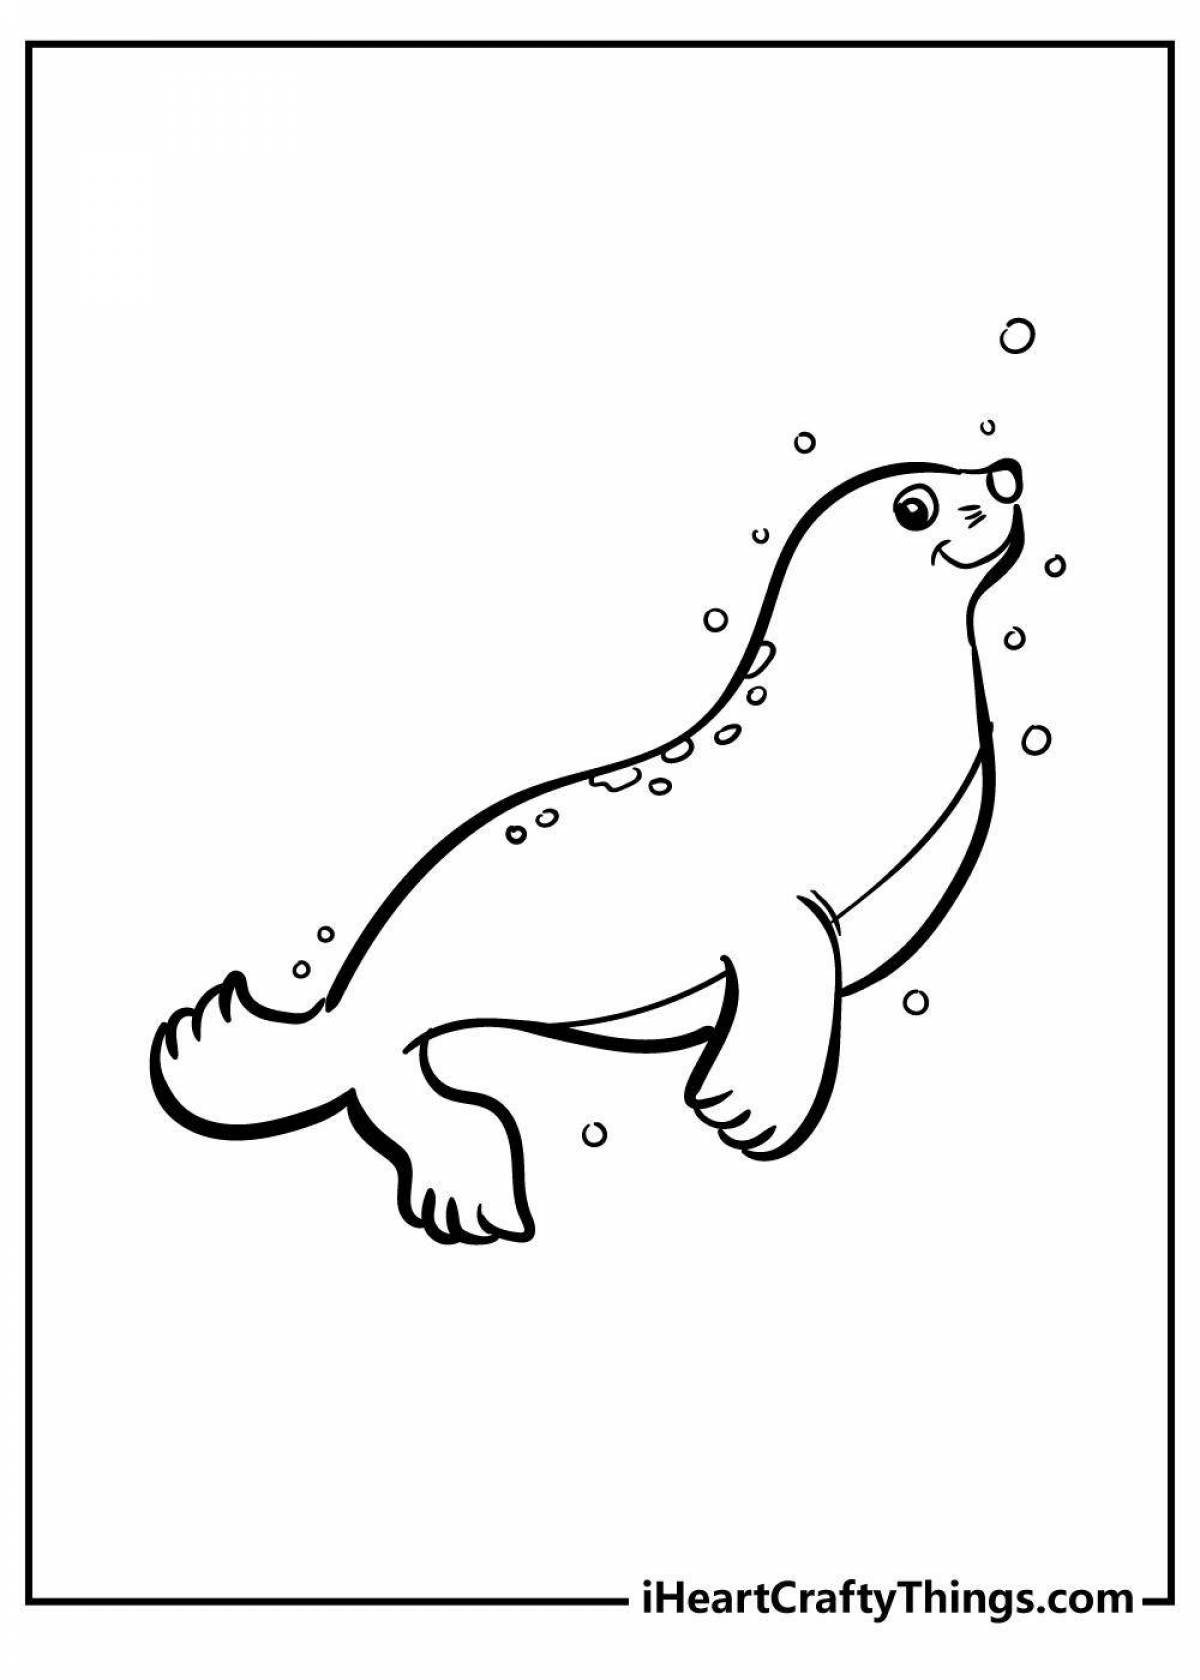 Cute seal coloring for kids